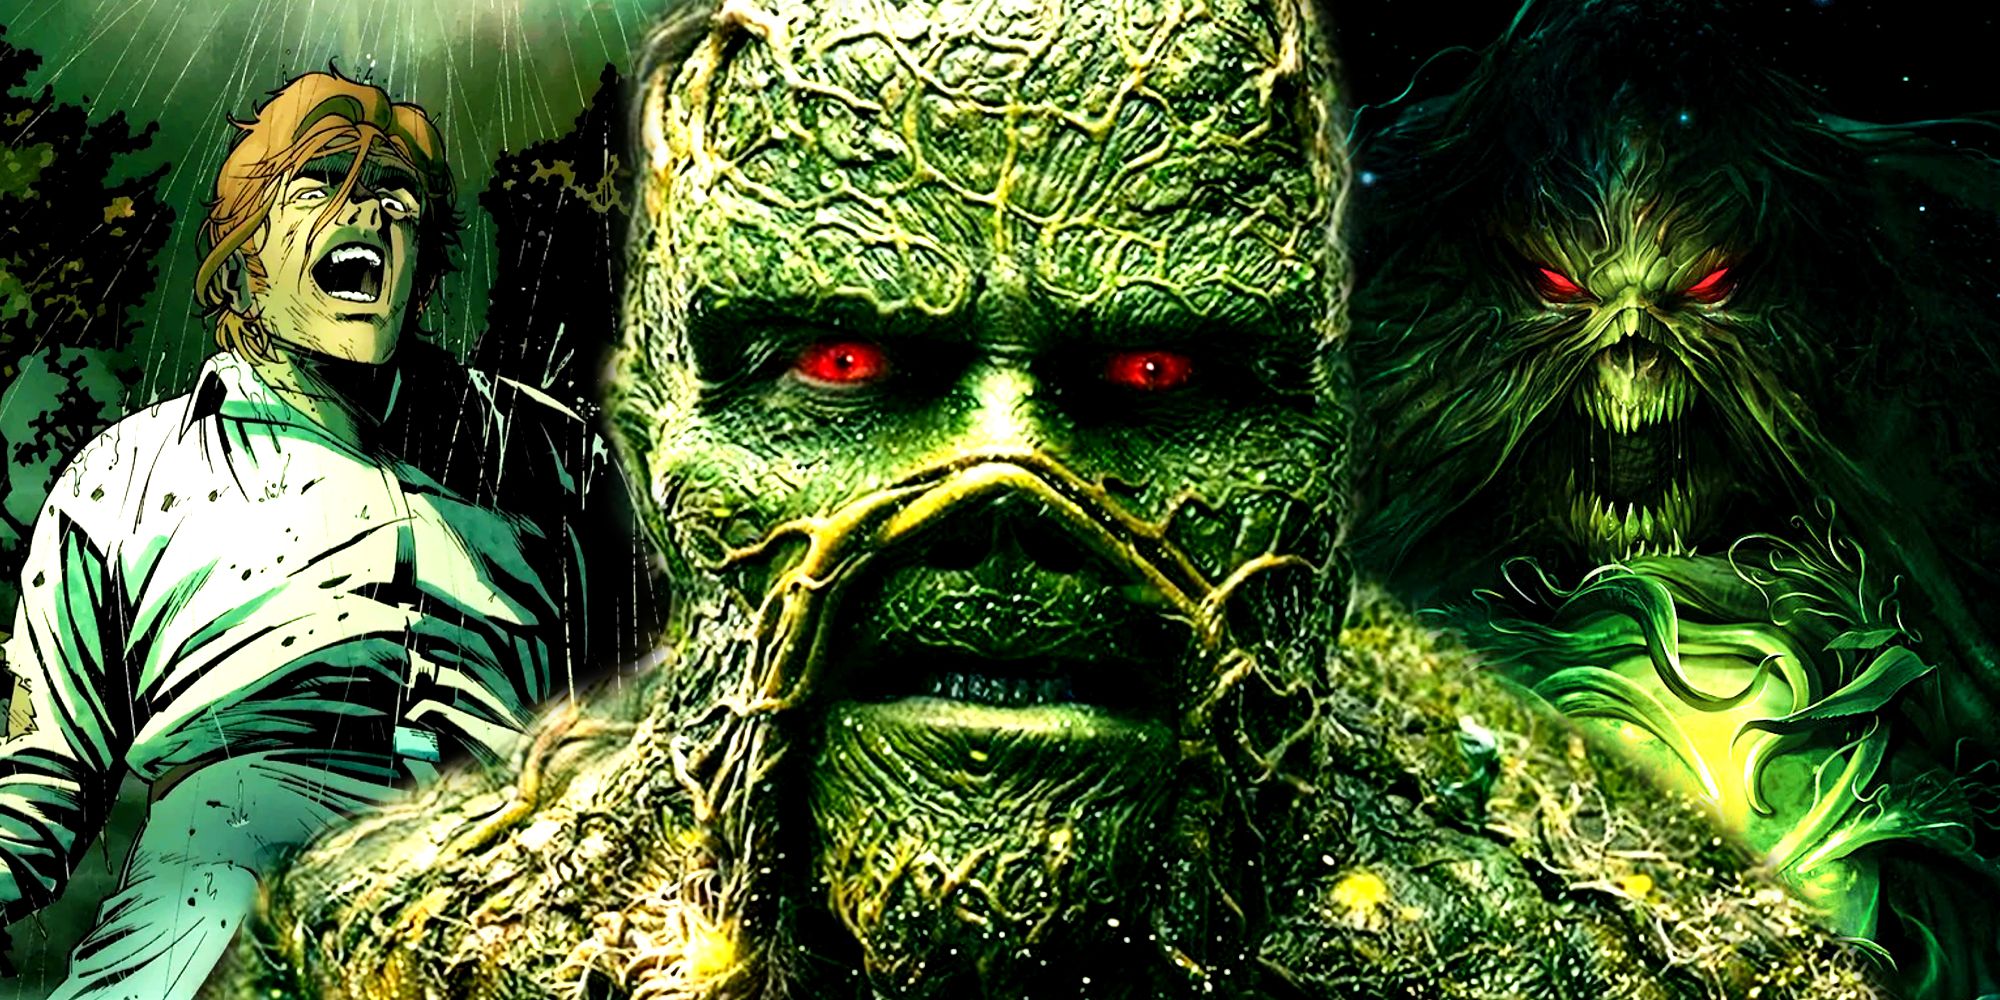 Swamp Thing from the 2019 Series and in DC Comics